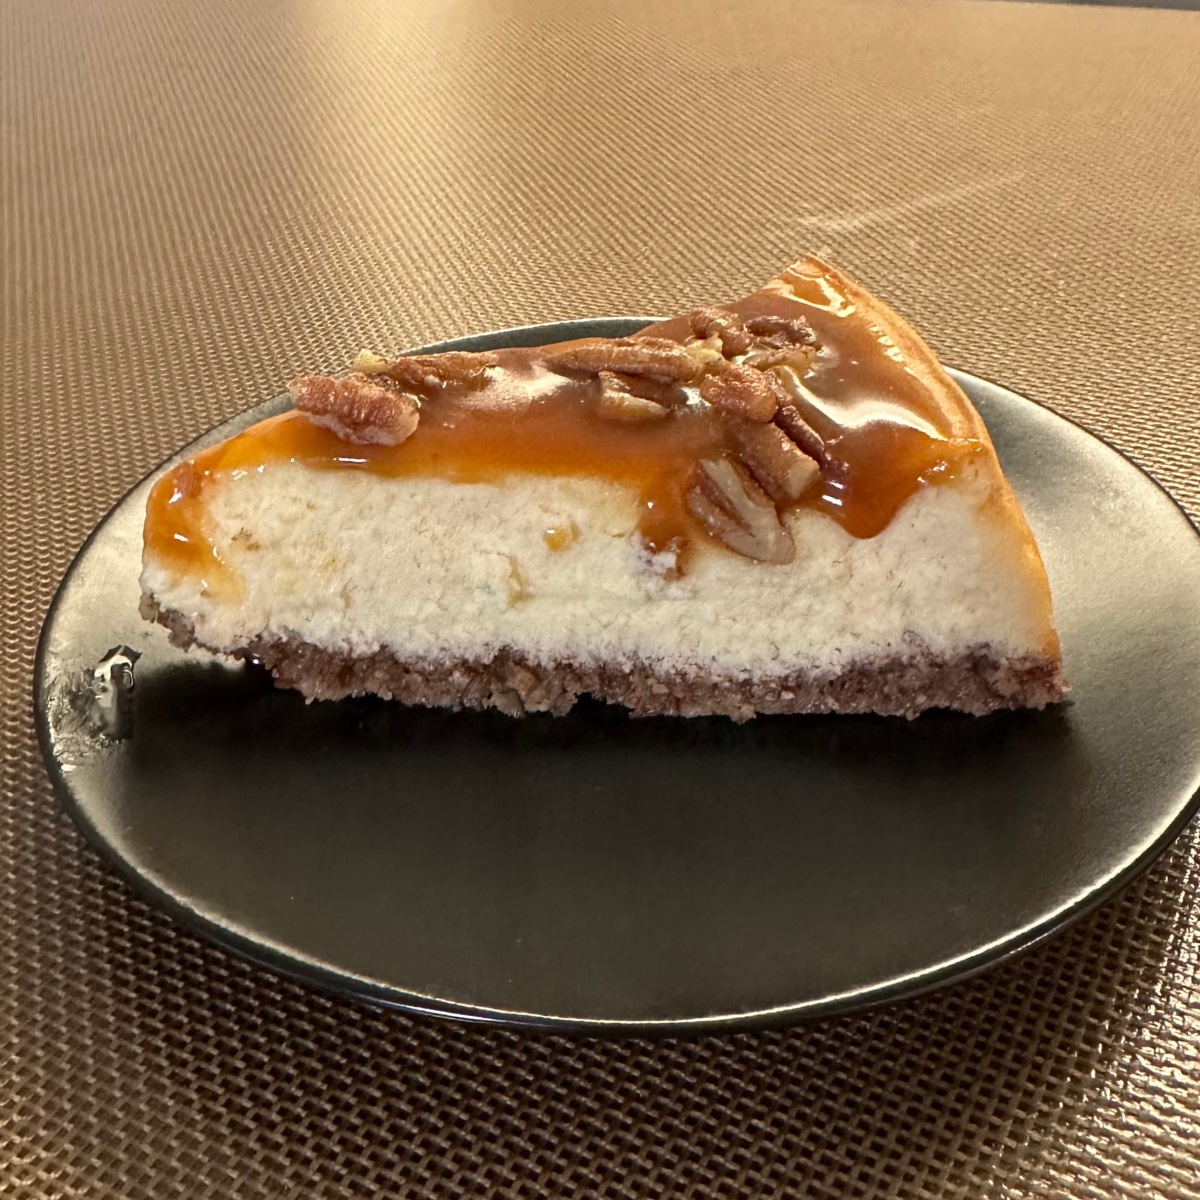 Vanilla Cheesecake with Caramel and Salted Pecans. Let’s do this!!!